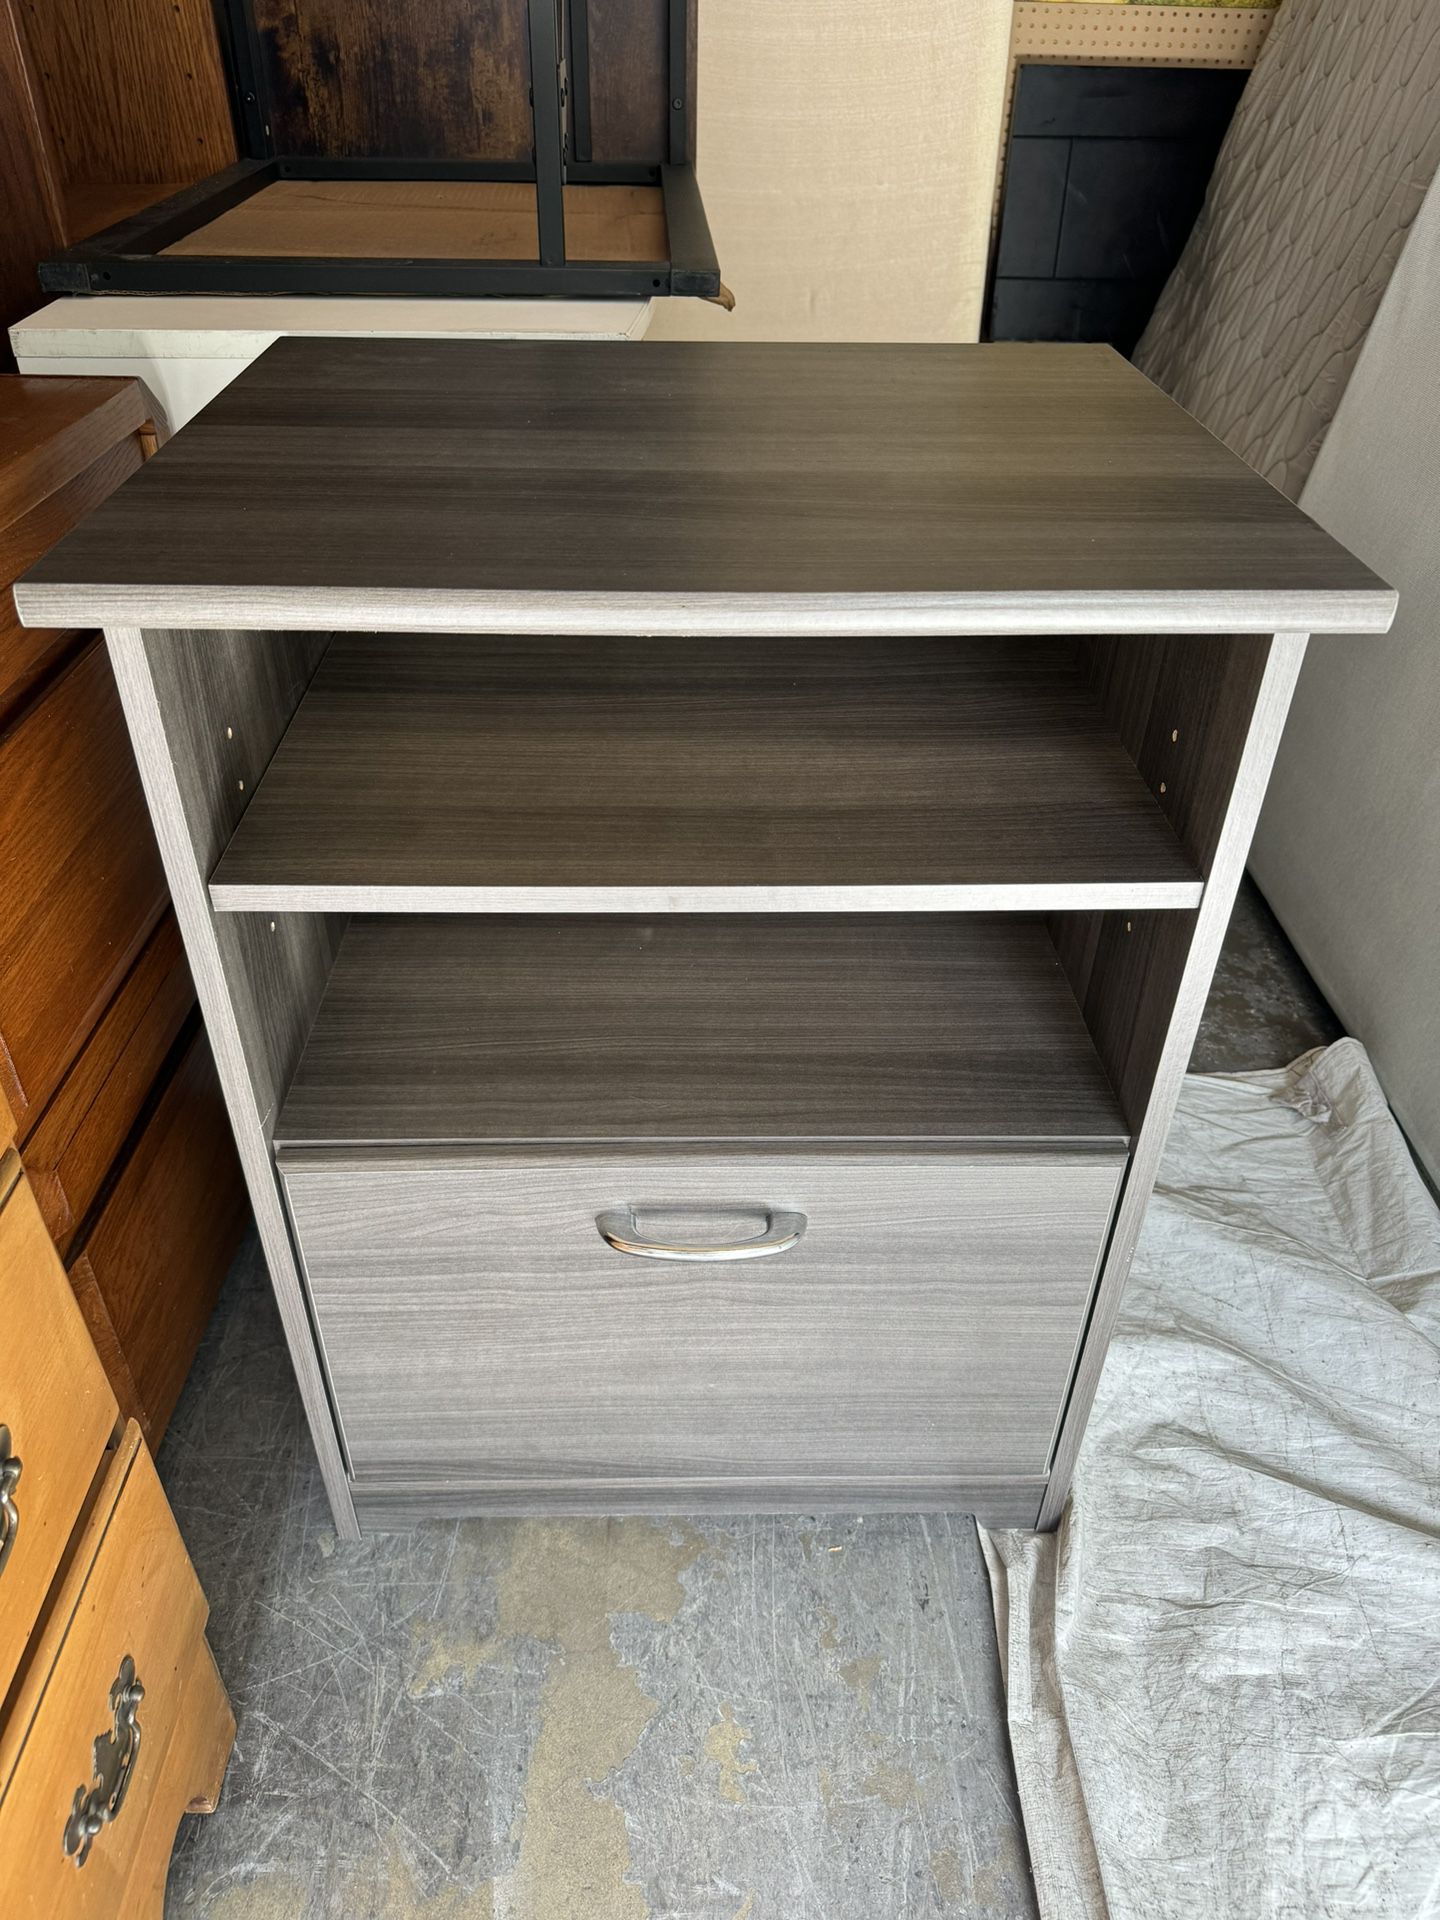 Like new Modern wooden 3- layer shelf printer stand  /microwave / pantry cabinet w/ file cabinet drawer.  measurements : 20 deep x 24W x 30 H . 